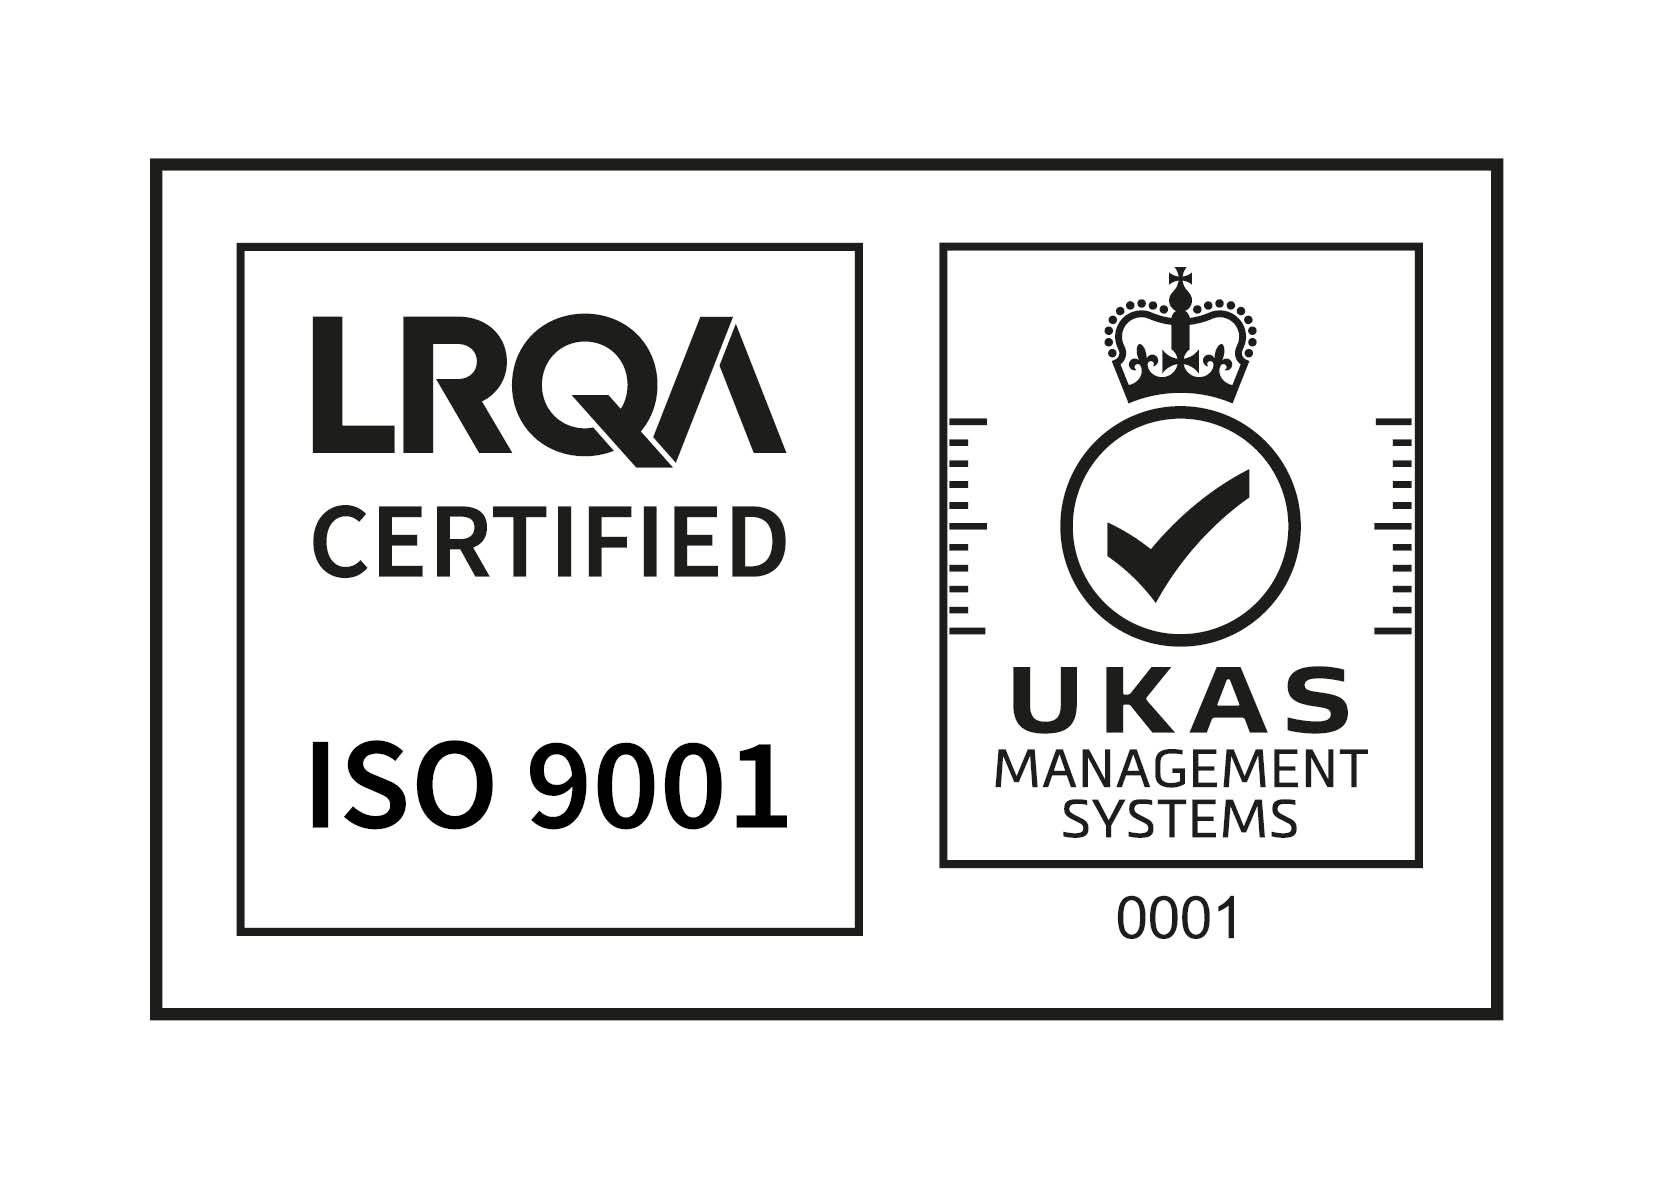 Suehiro was certified as compliant with ISO 9001